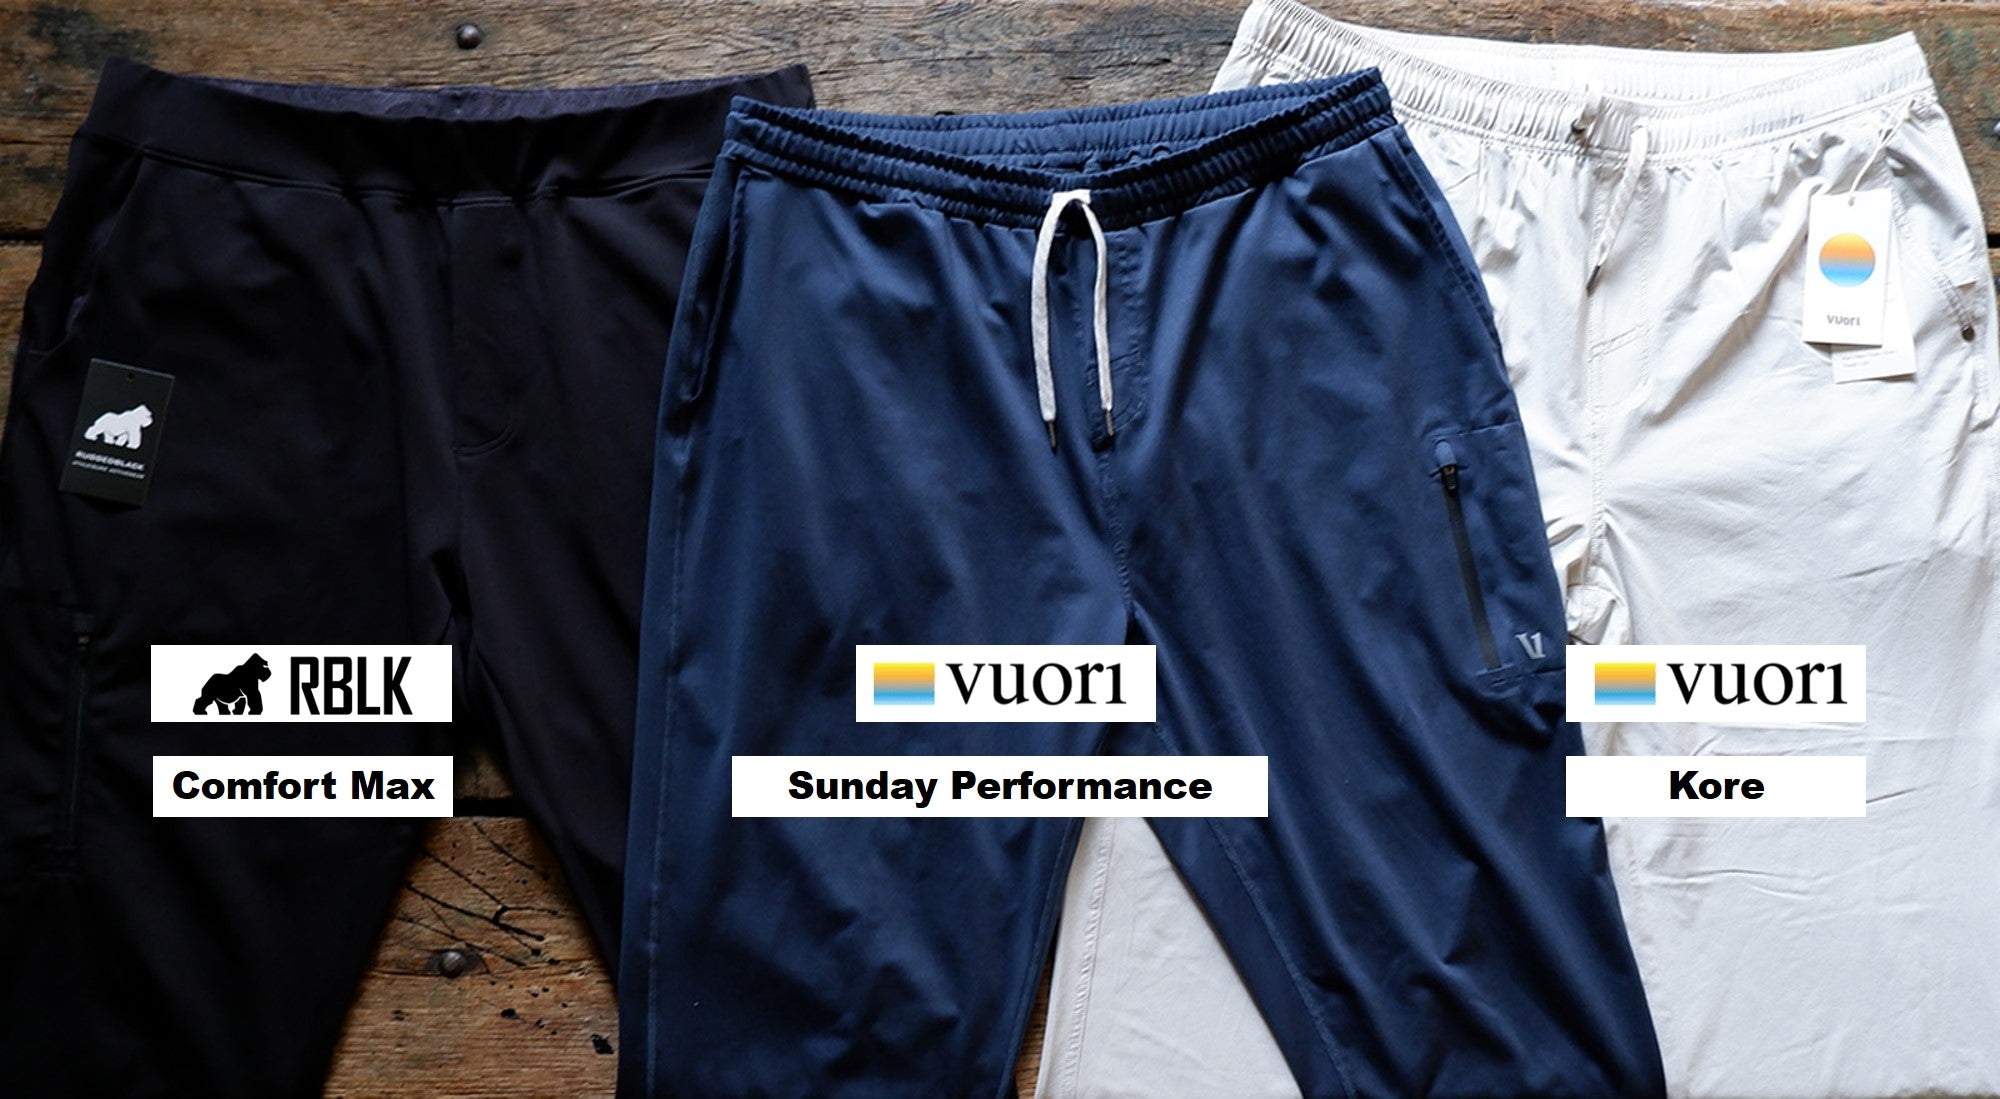 Vuori Men’s Haul: Reviewing the New Kore Joggers and Sunday Performance Joggers, And Dupe Alternatives Half the Price